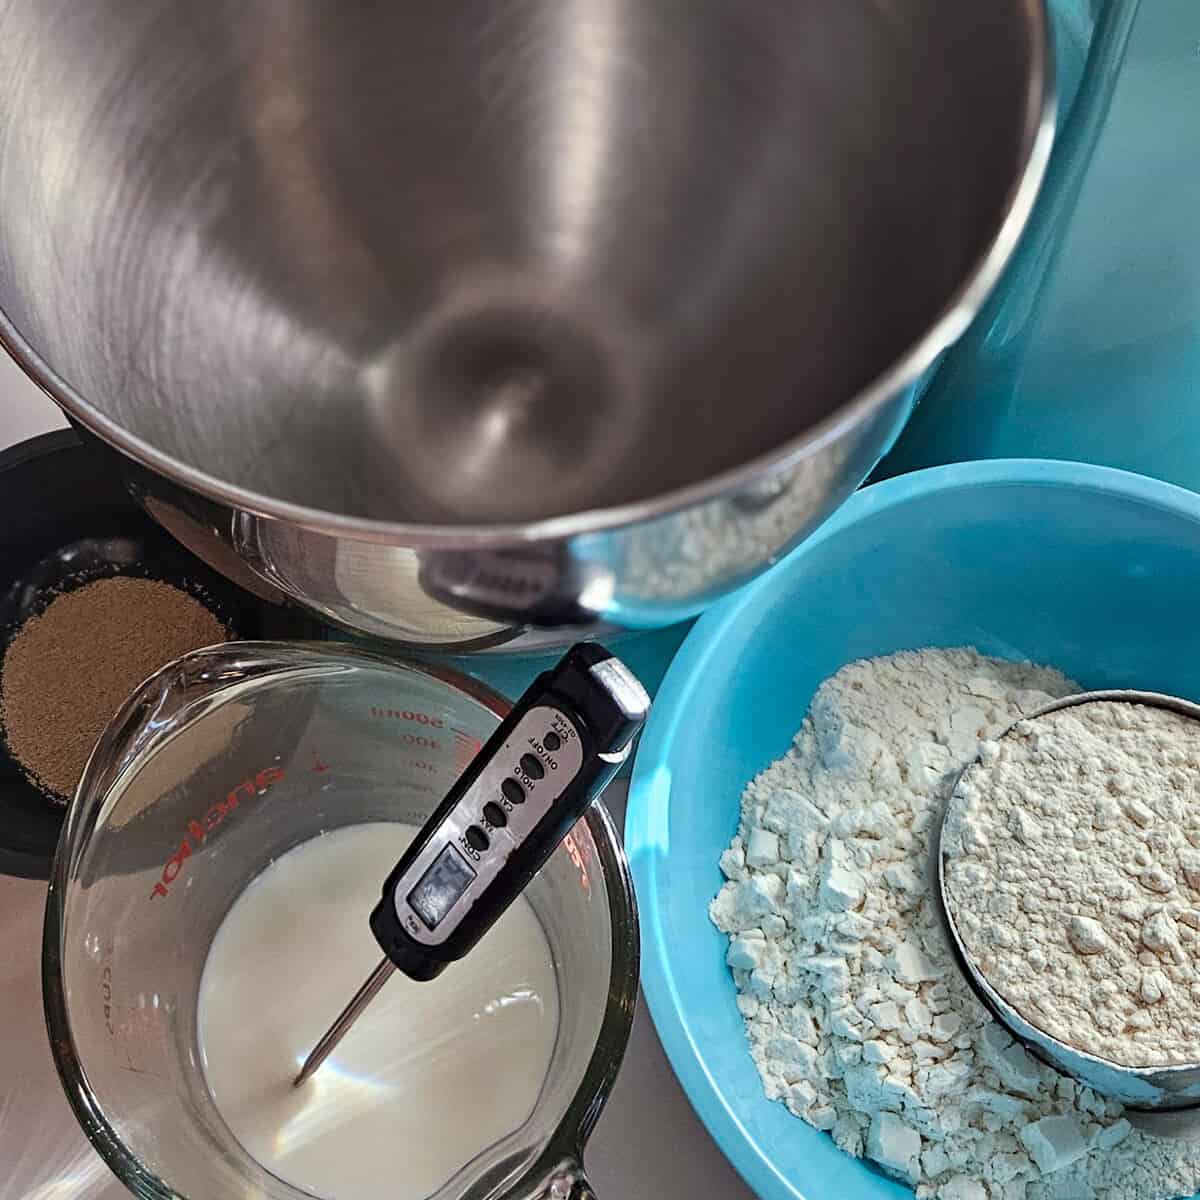 the ingredients for the sponge with a thermometer in a cup of milk, for the brioche blueberry cinnamon rolls